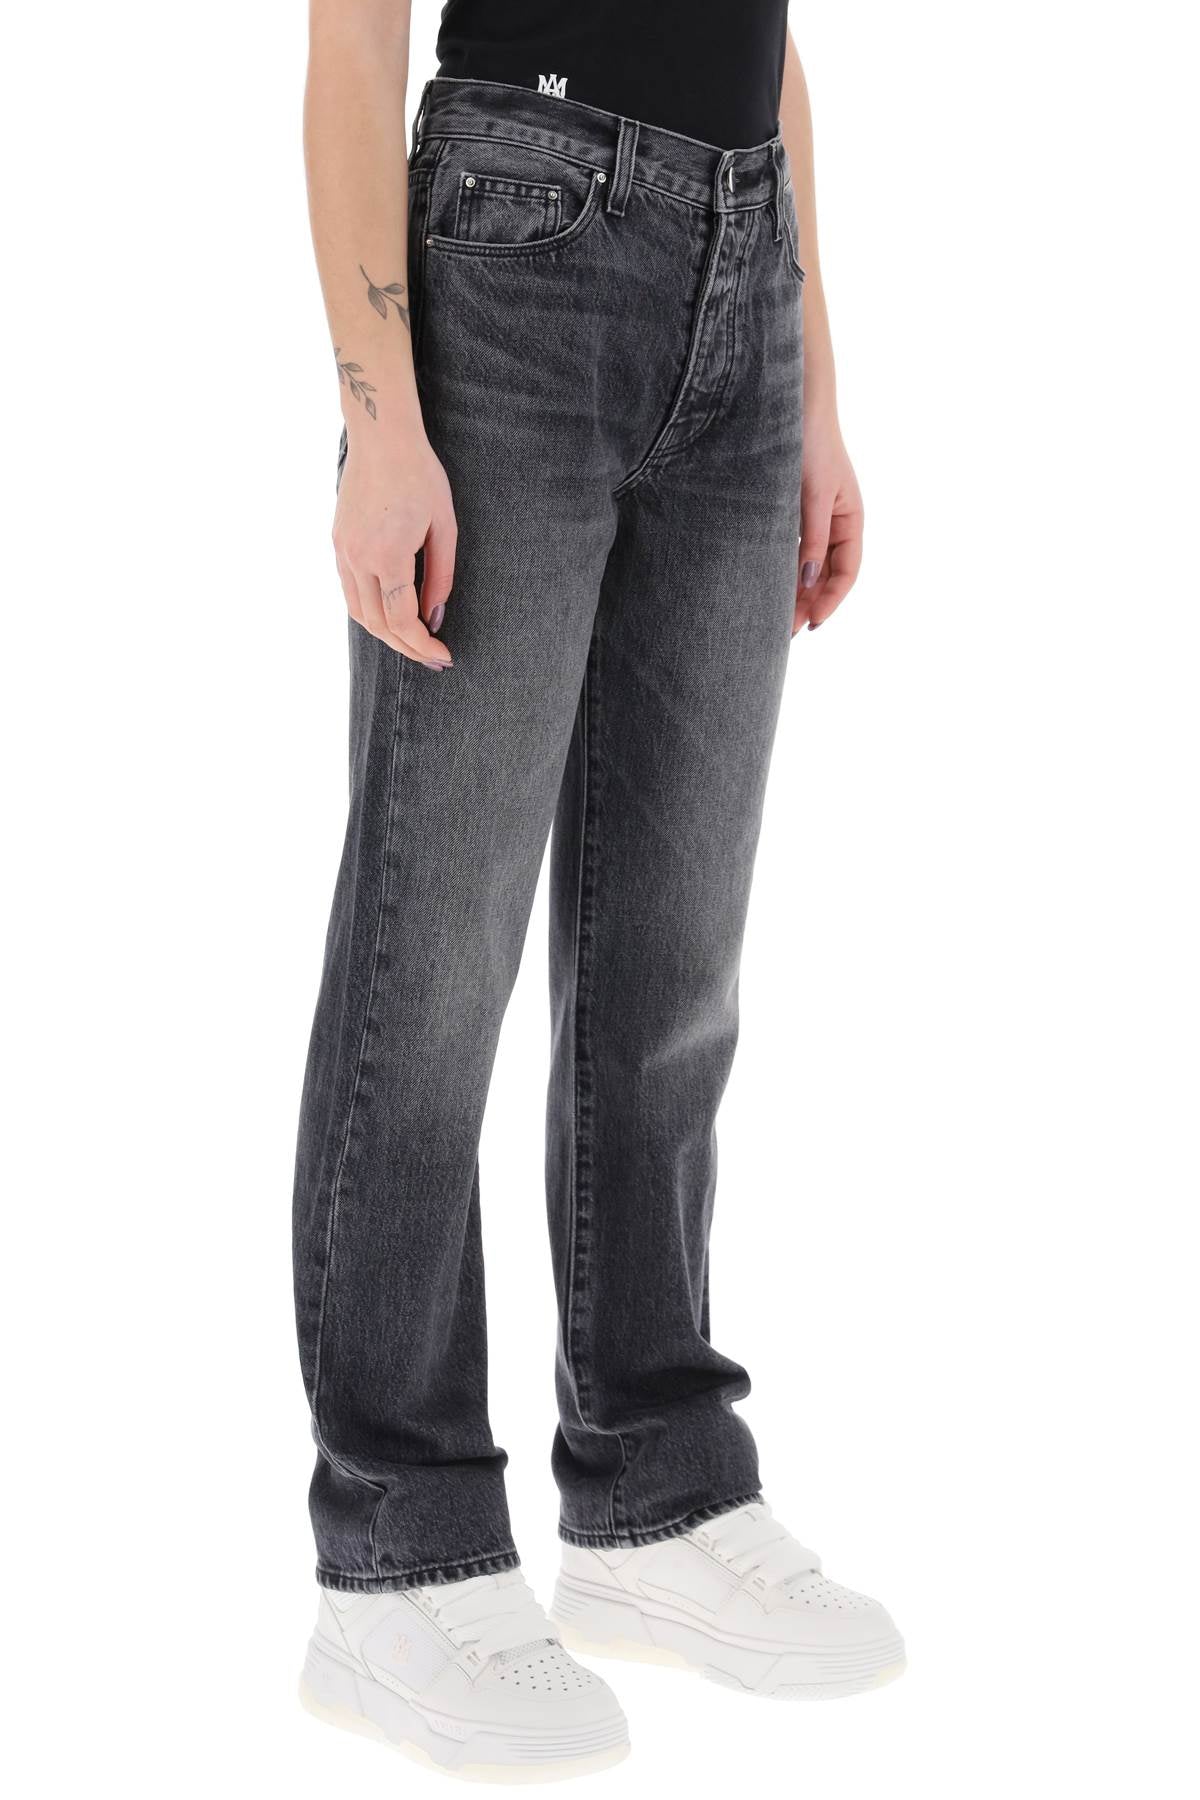 Dark Vintage-Washed Straight Cut Jeans for Women by AMIRI